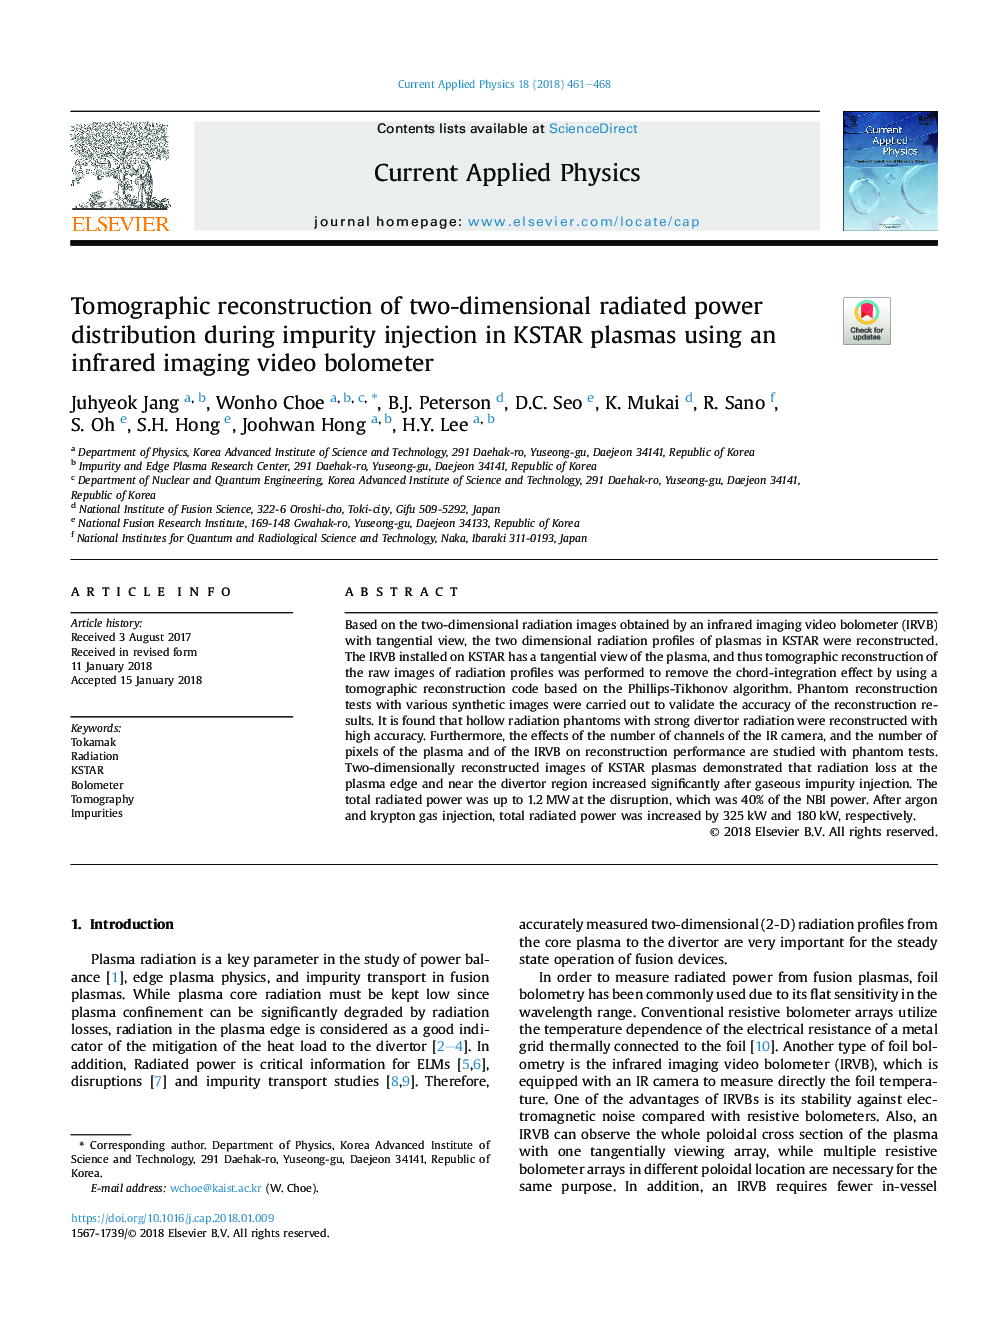 Tomographic reconstruction of two-dimensional radiated power distribution during impurity injection in KSTAR plasmas using an infrared imaging video bolometer